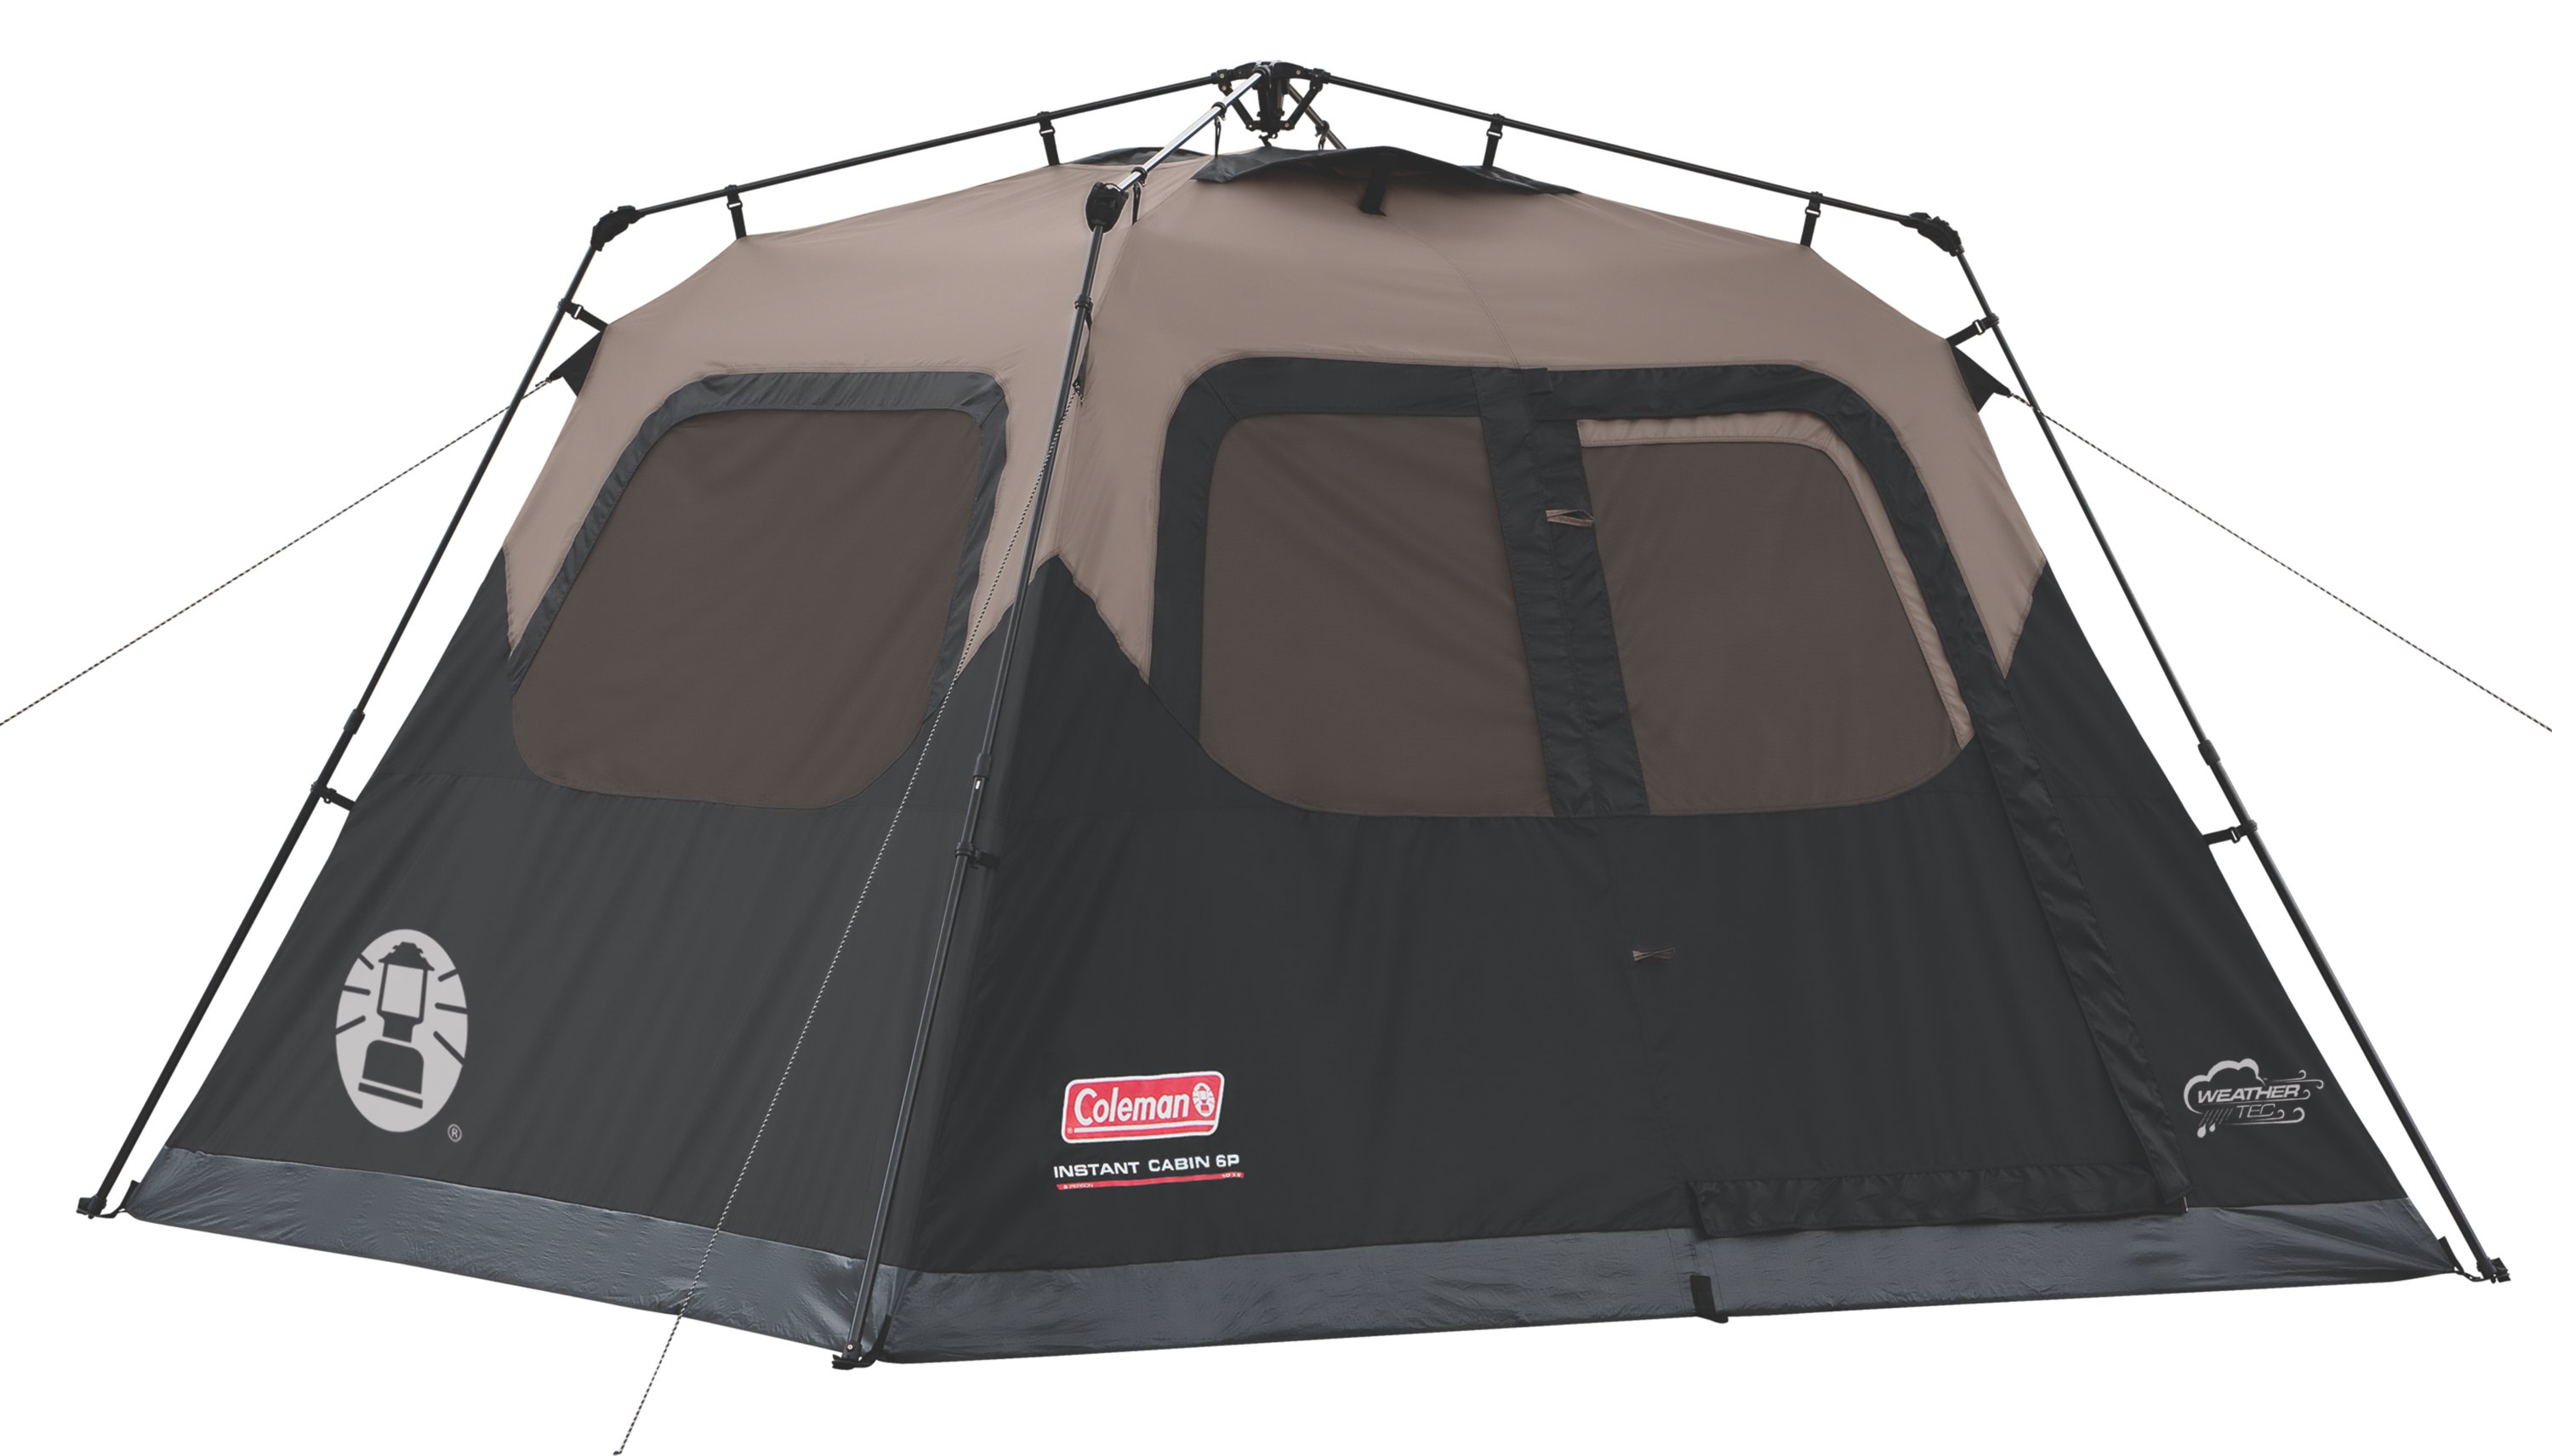 First Look: CORE 10-Person Lighted Instant Cabin Tent from Costco 